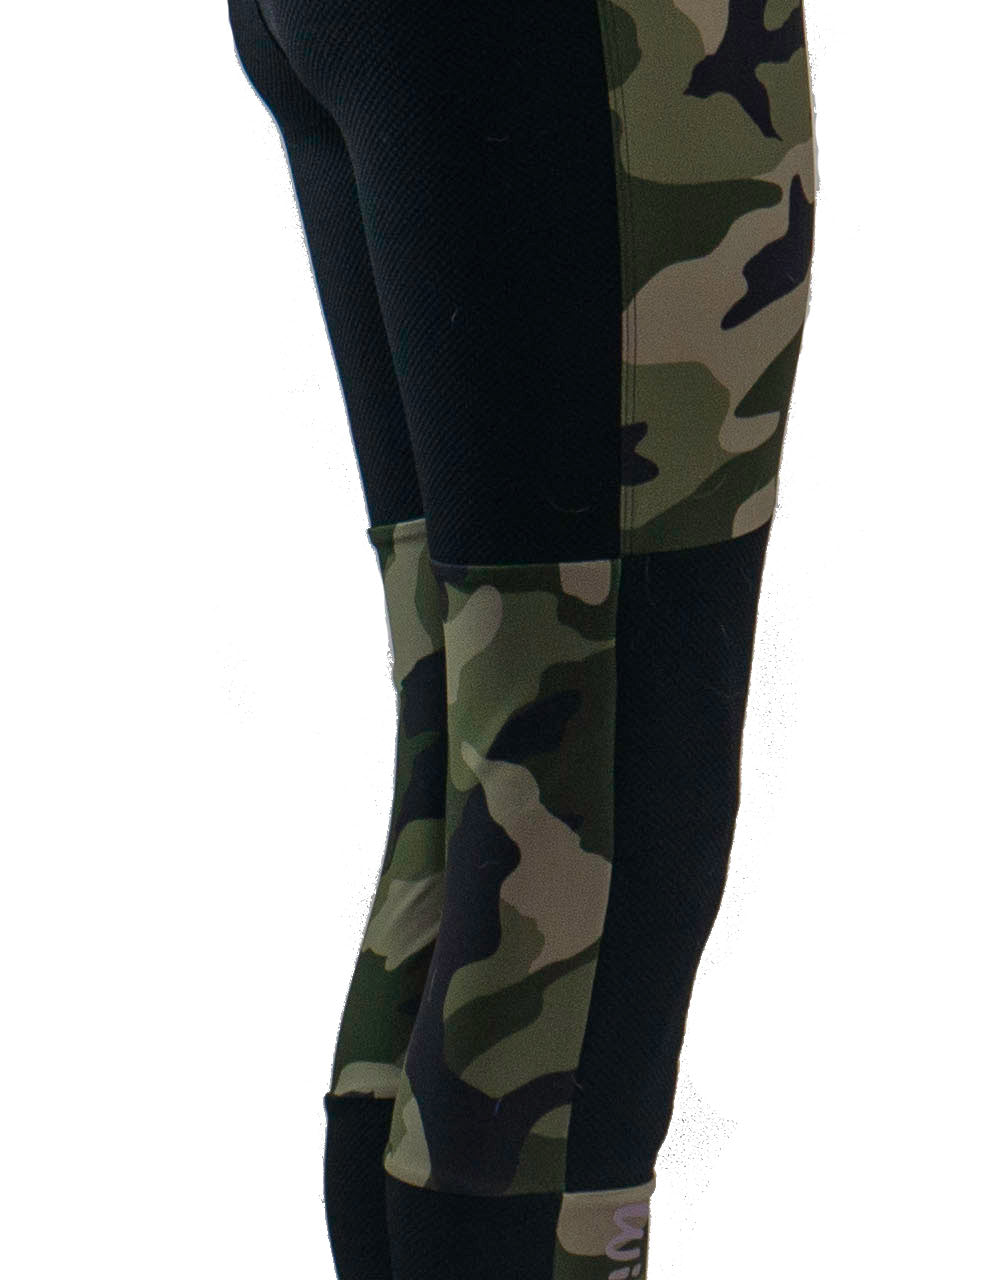 DROP IN MTB PANTS OLIVE CAMO - Moxie Cycling